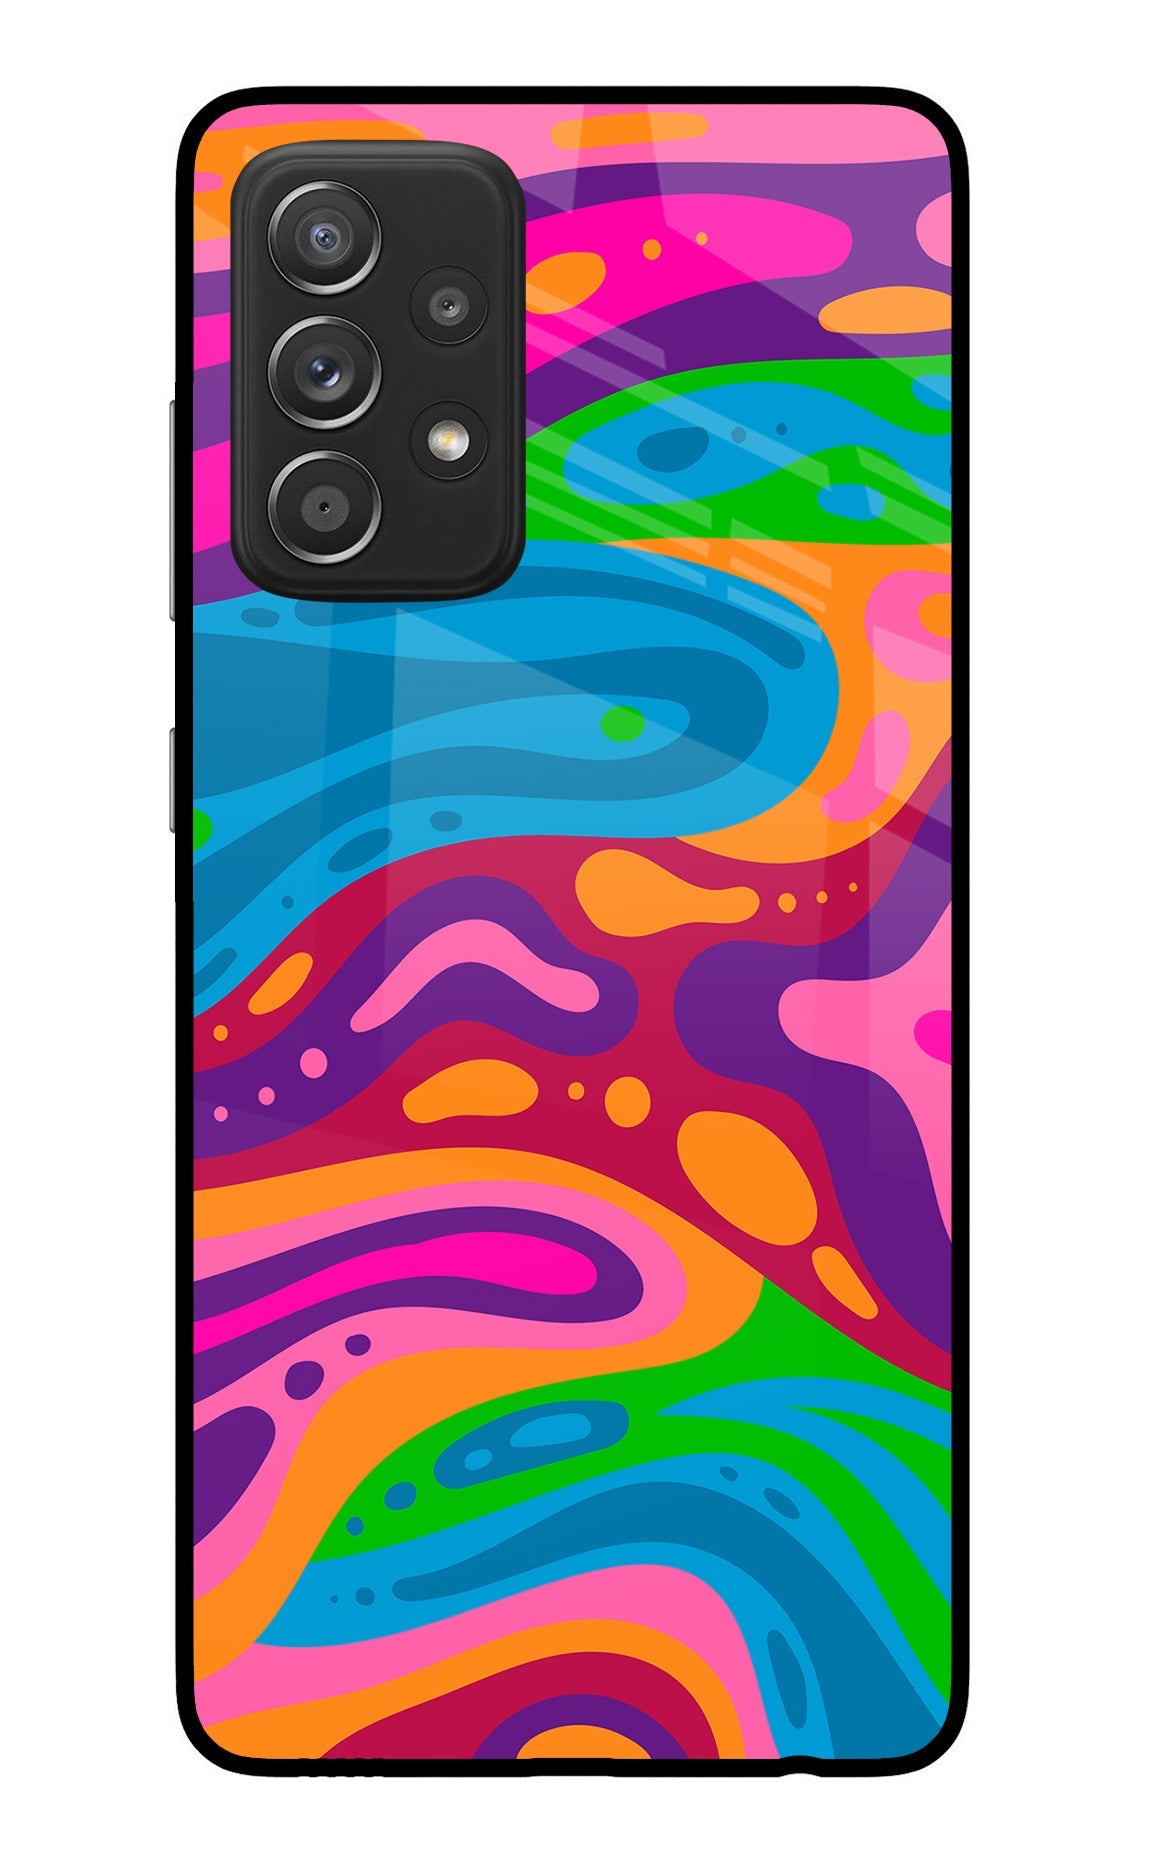 Trippy Pattern Samsung A52/A52s 5G Back Cover